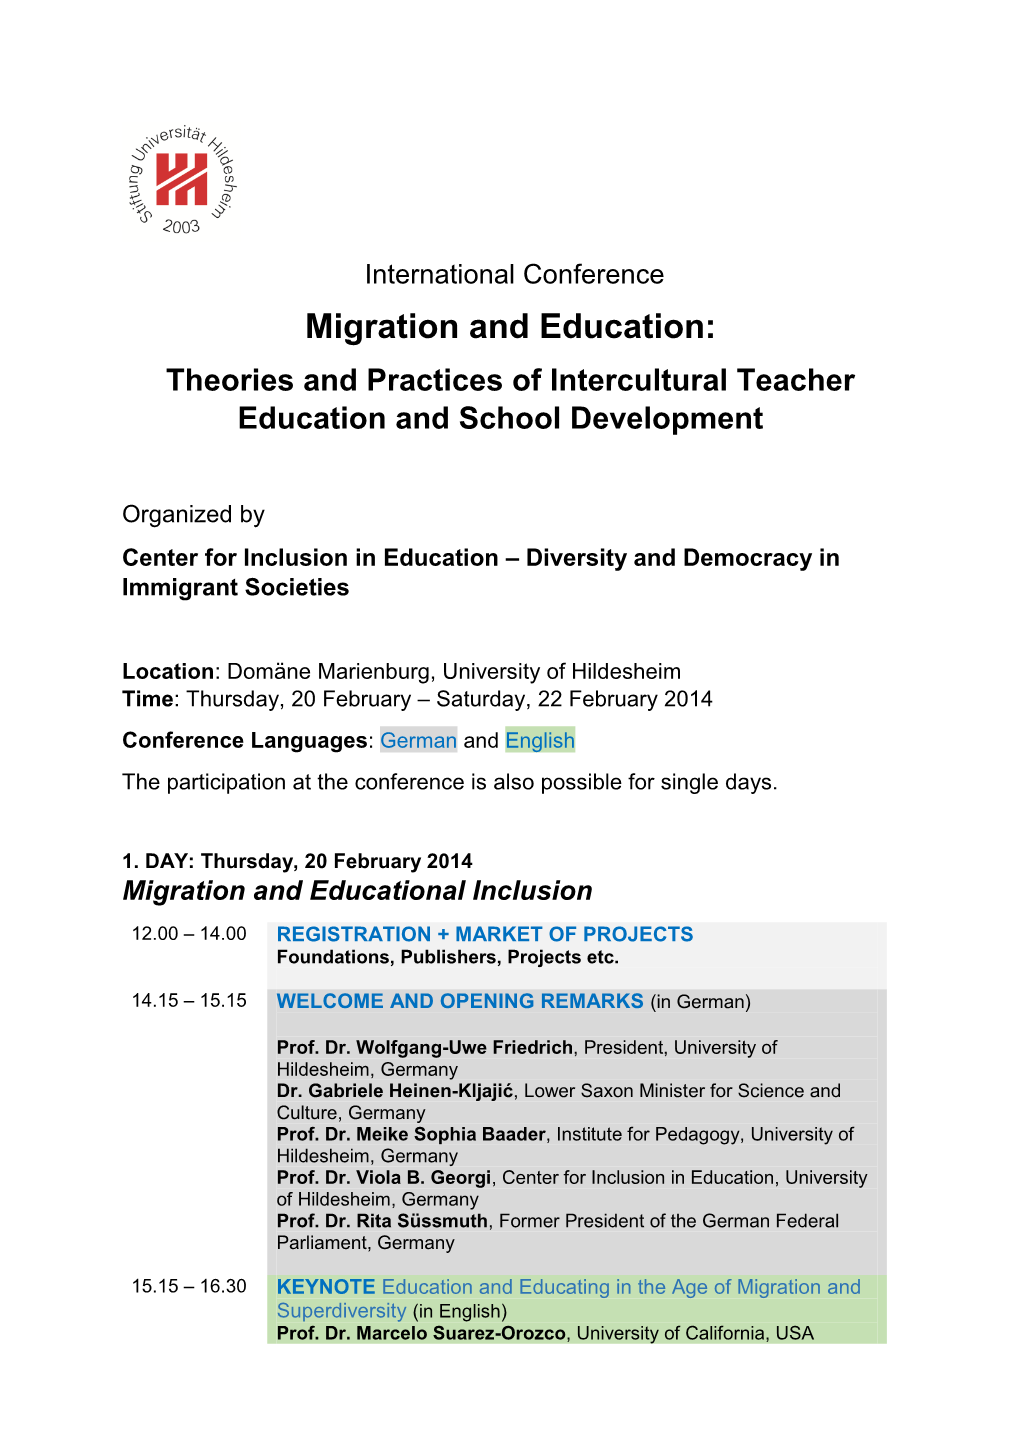 International Conference Migration and Education: Theories and Practices of Intercultural Teacher Education and School Development